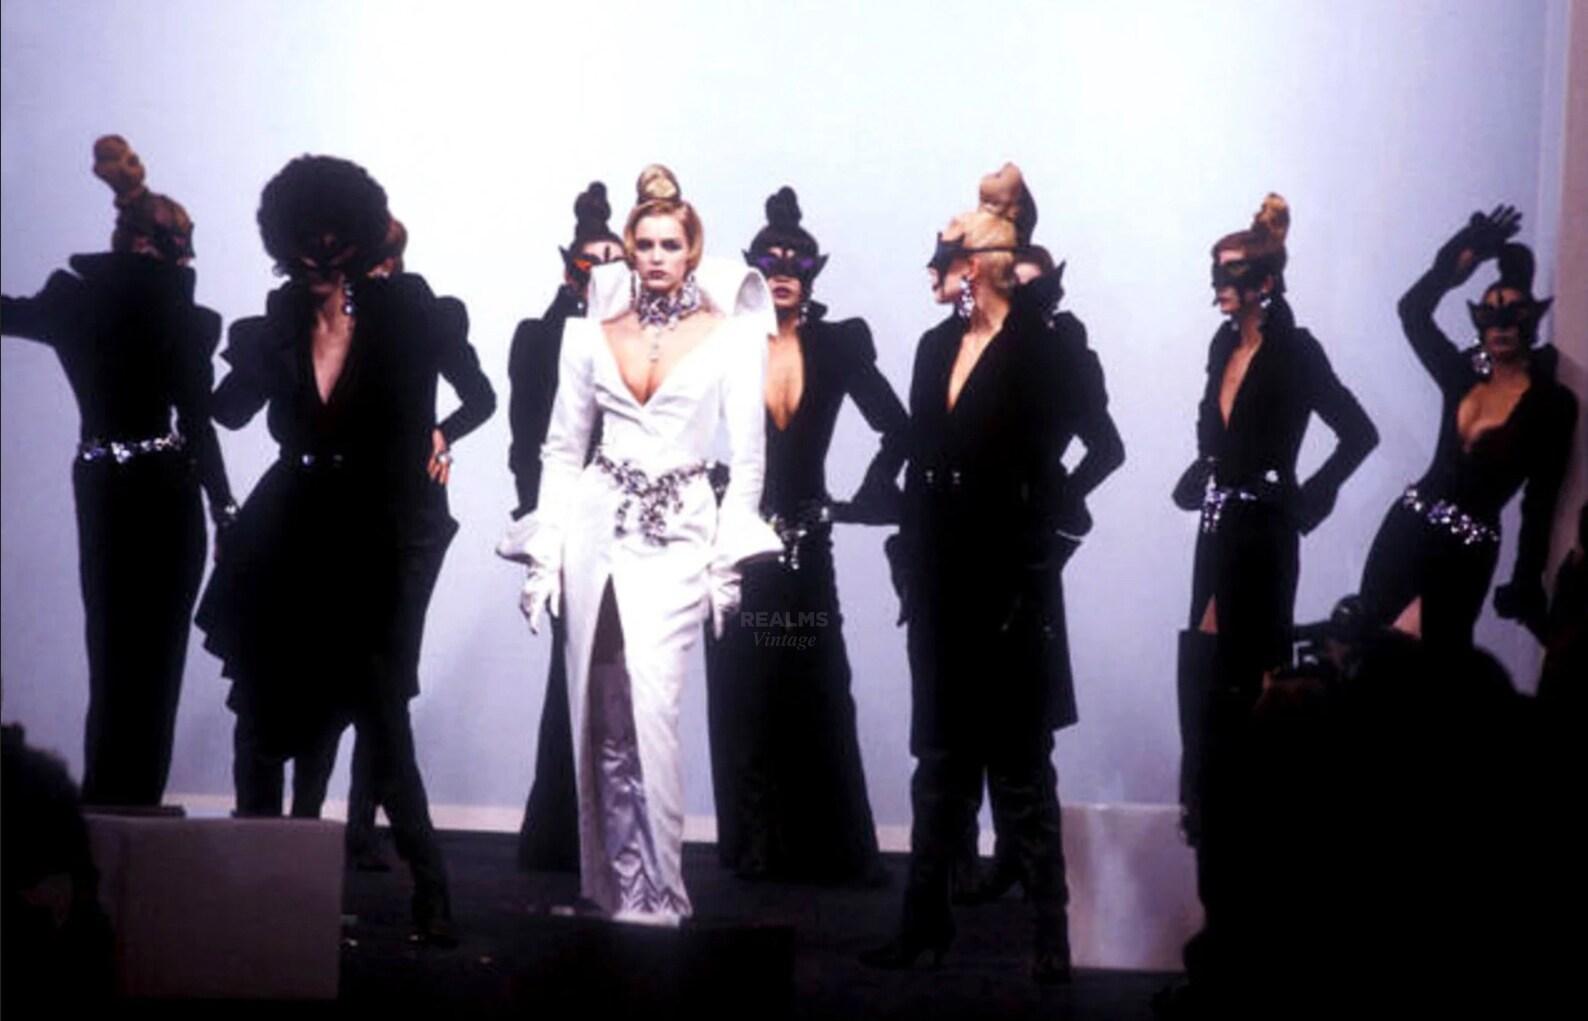 Stunning Thierry Mugler Archival  FW 1986 Evening Gown Crytsal Black Dress  For Sale 3